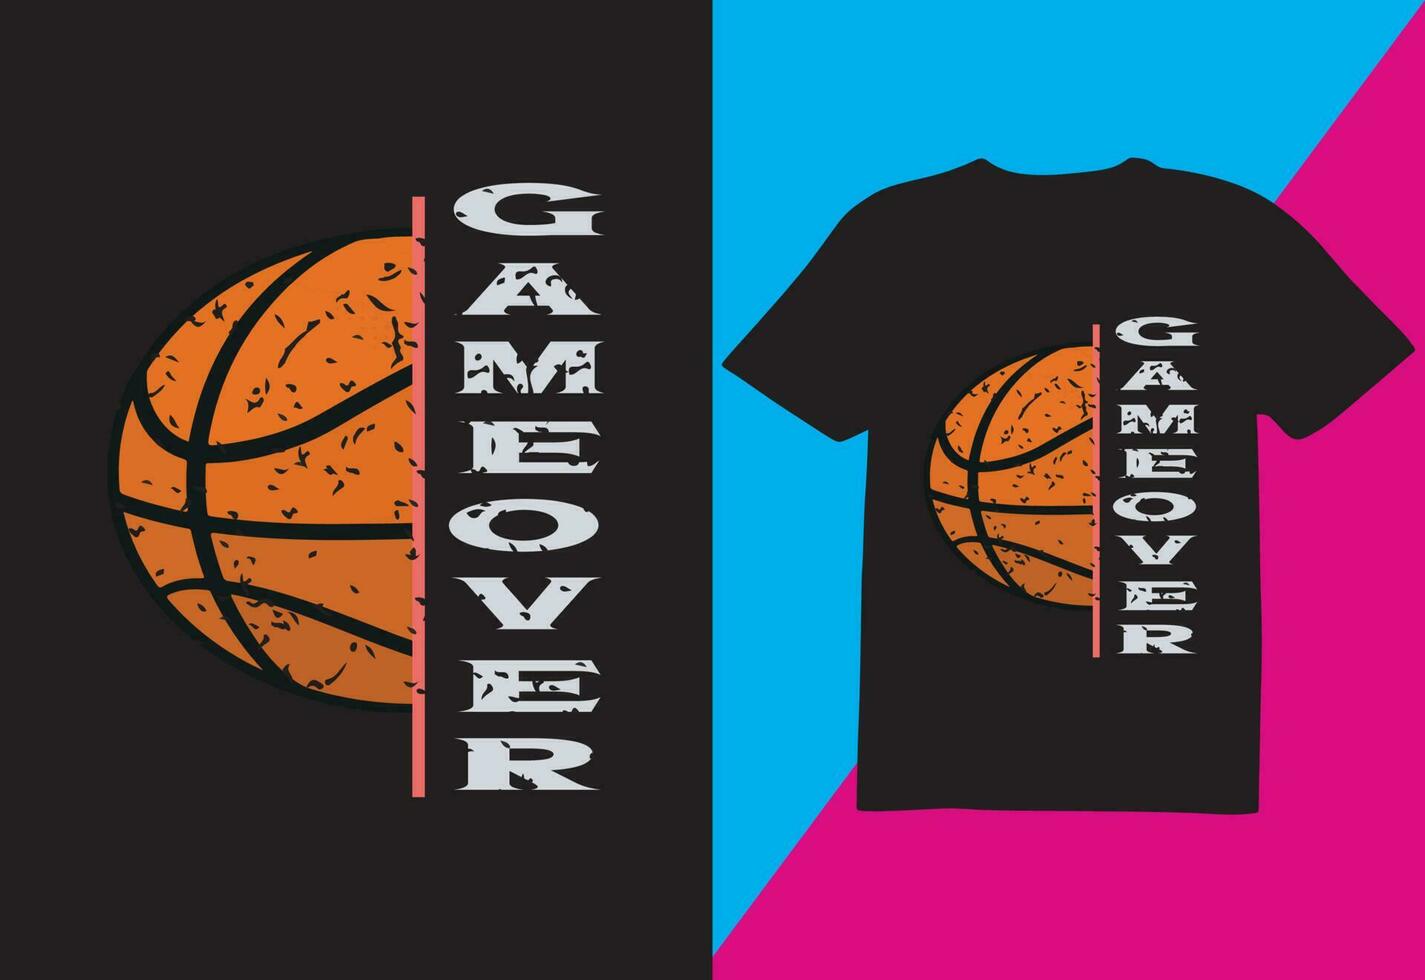 this is Bsaketball T-shirt Game over for Print vector